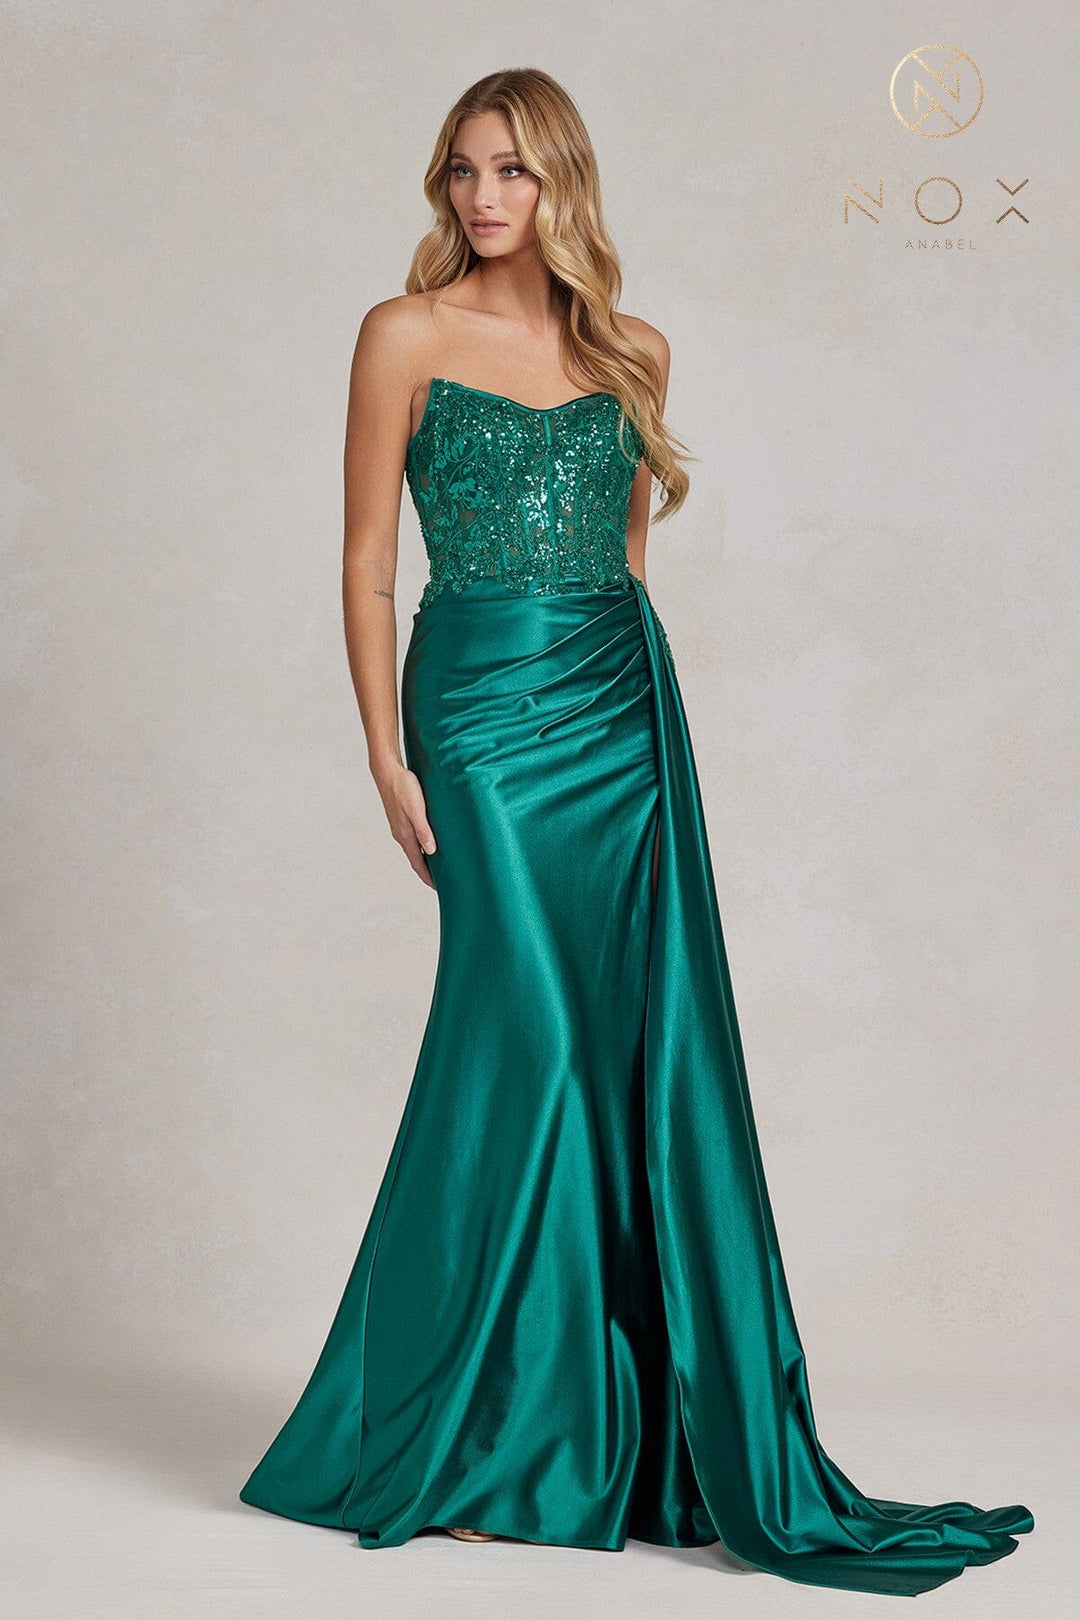 Embroidered Strapless Slit Gown by Nox Anabel E1174